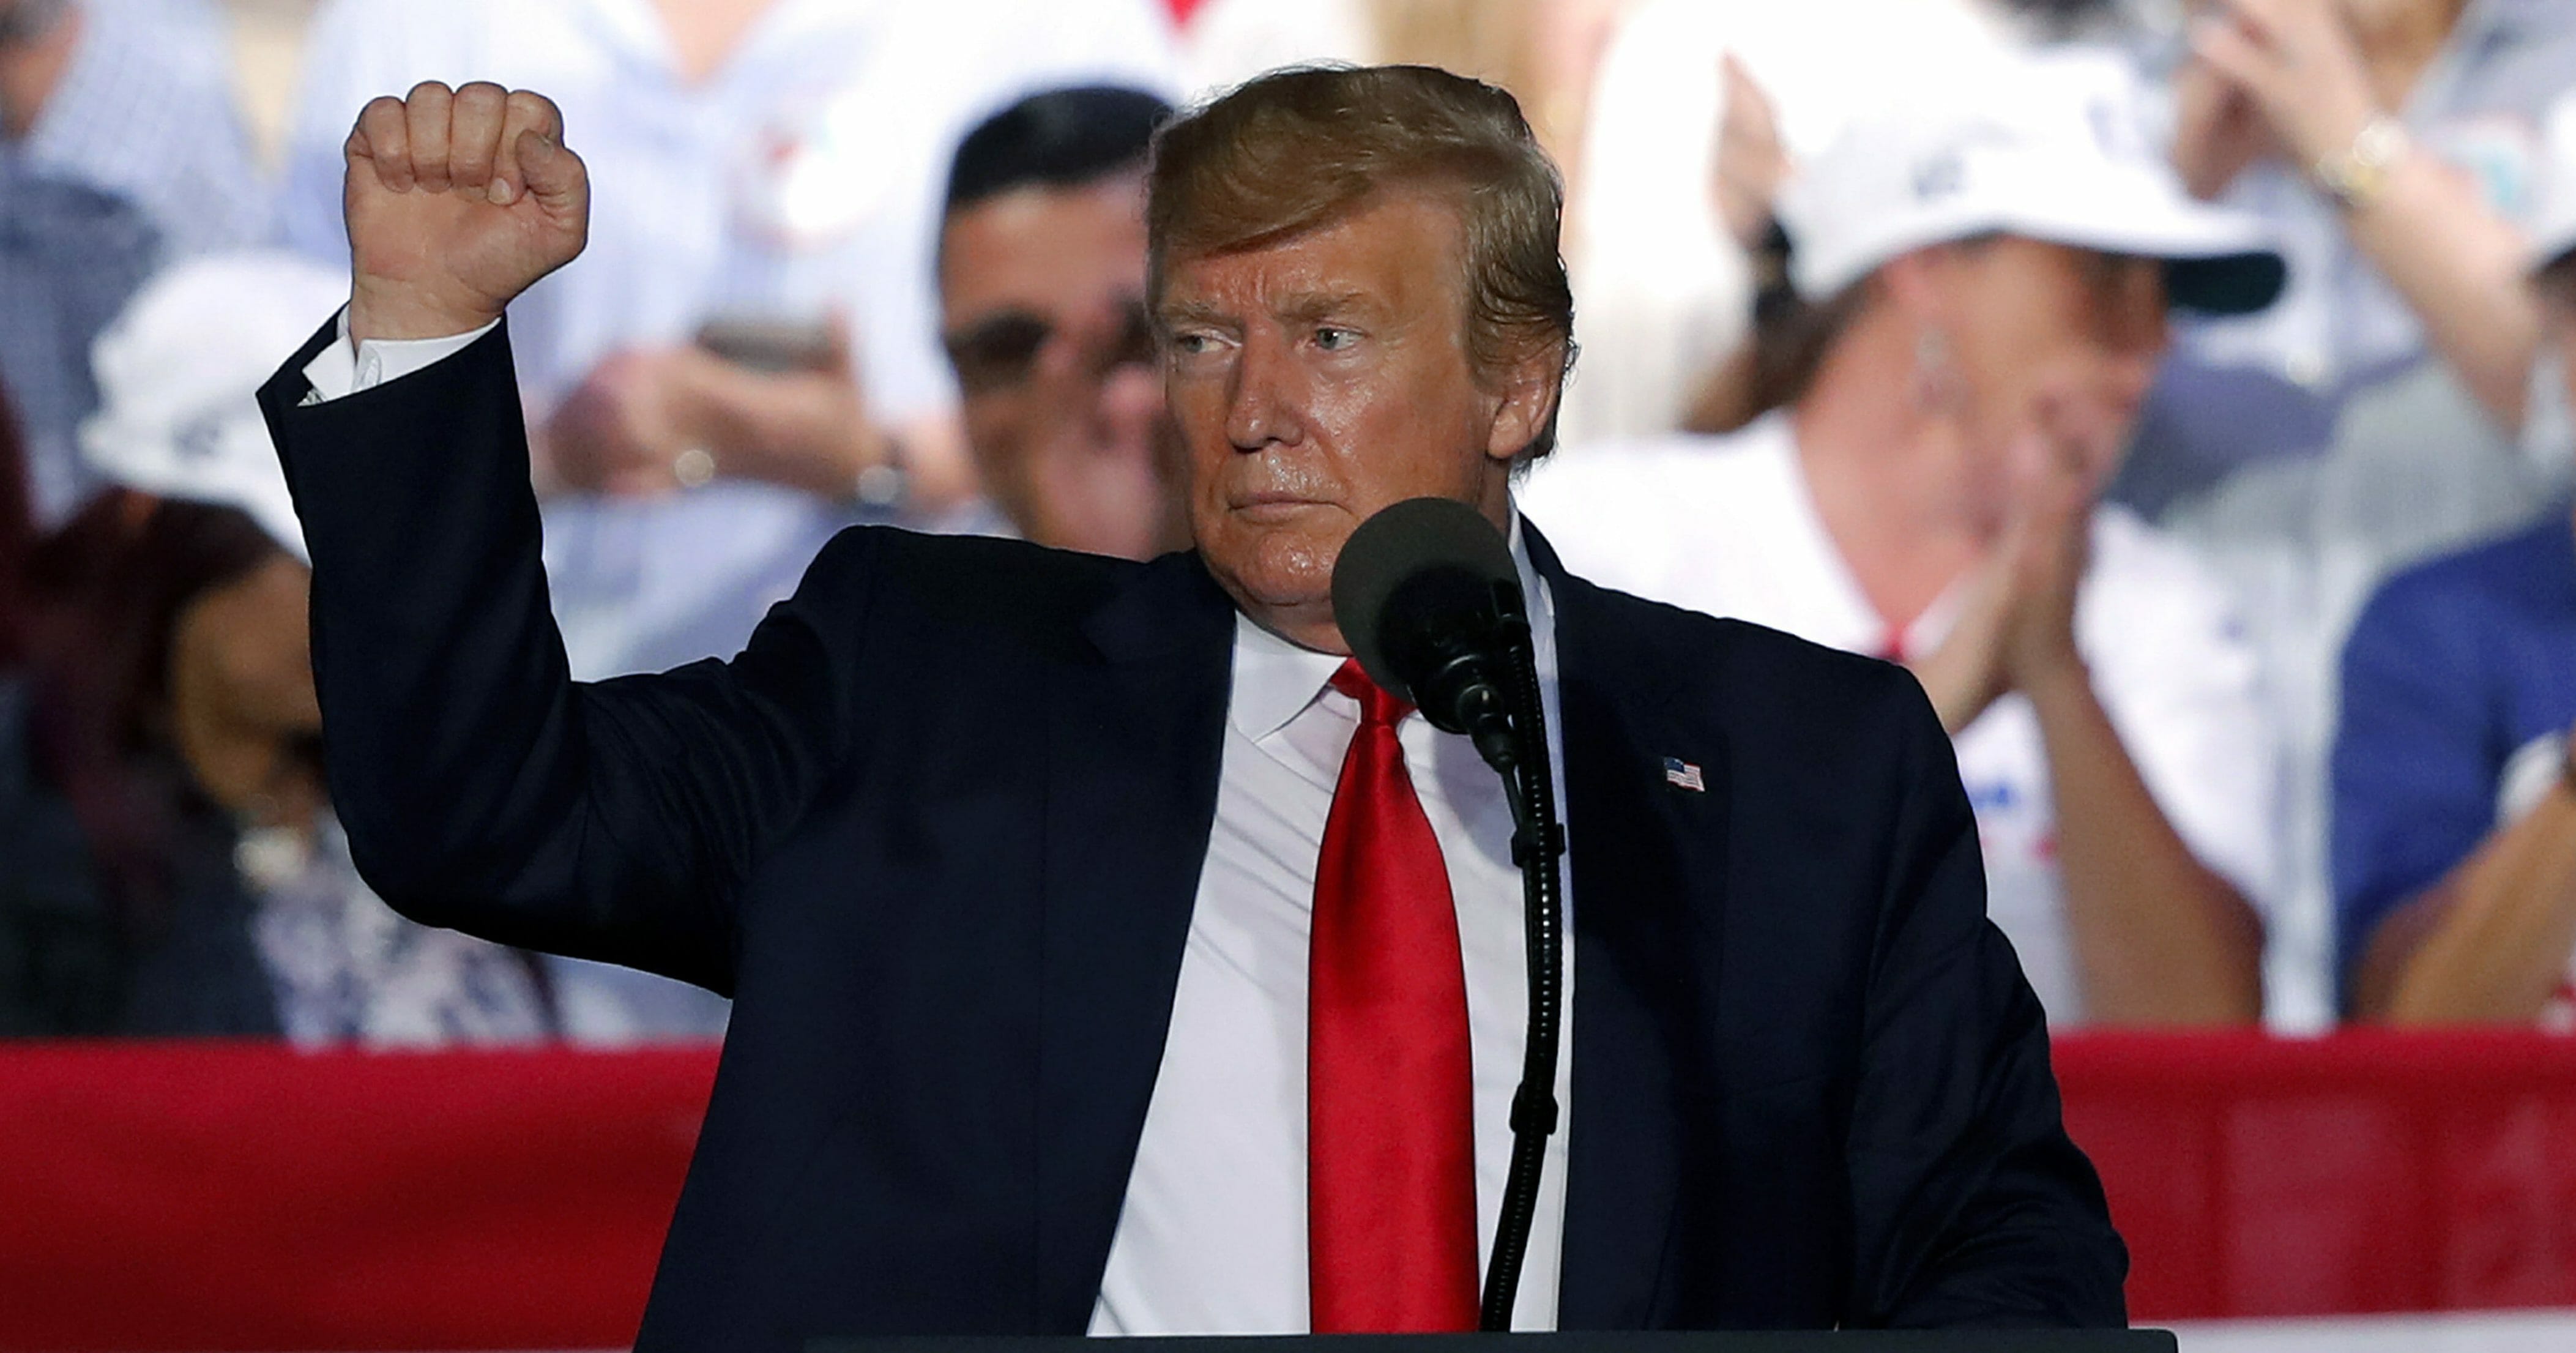 President Trump acknowledges the crowd at the end of his rally in Panama City Beach, Fla., on Wednesday, May 8, 2019.